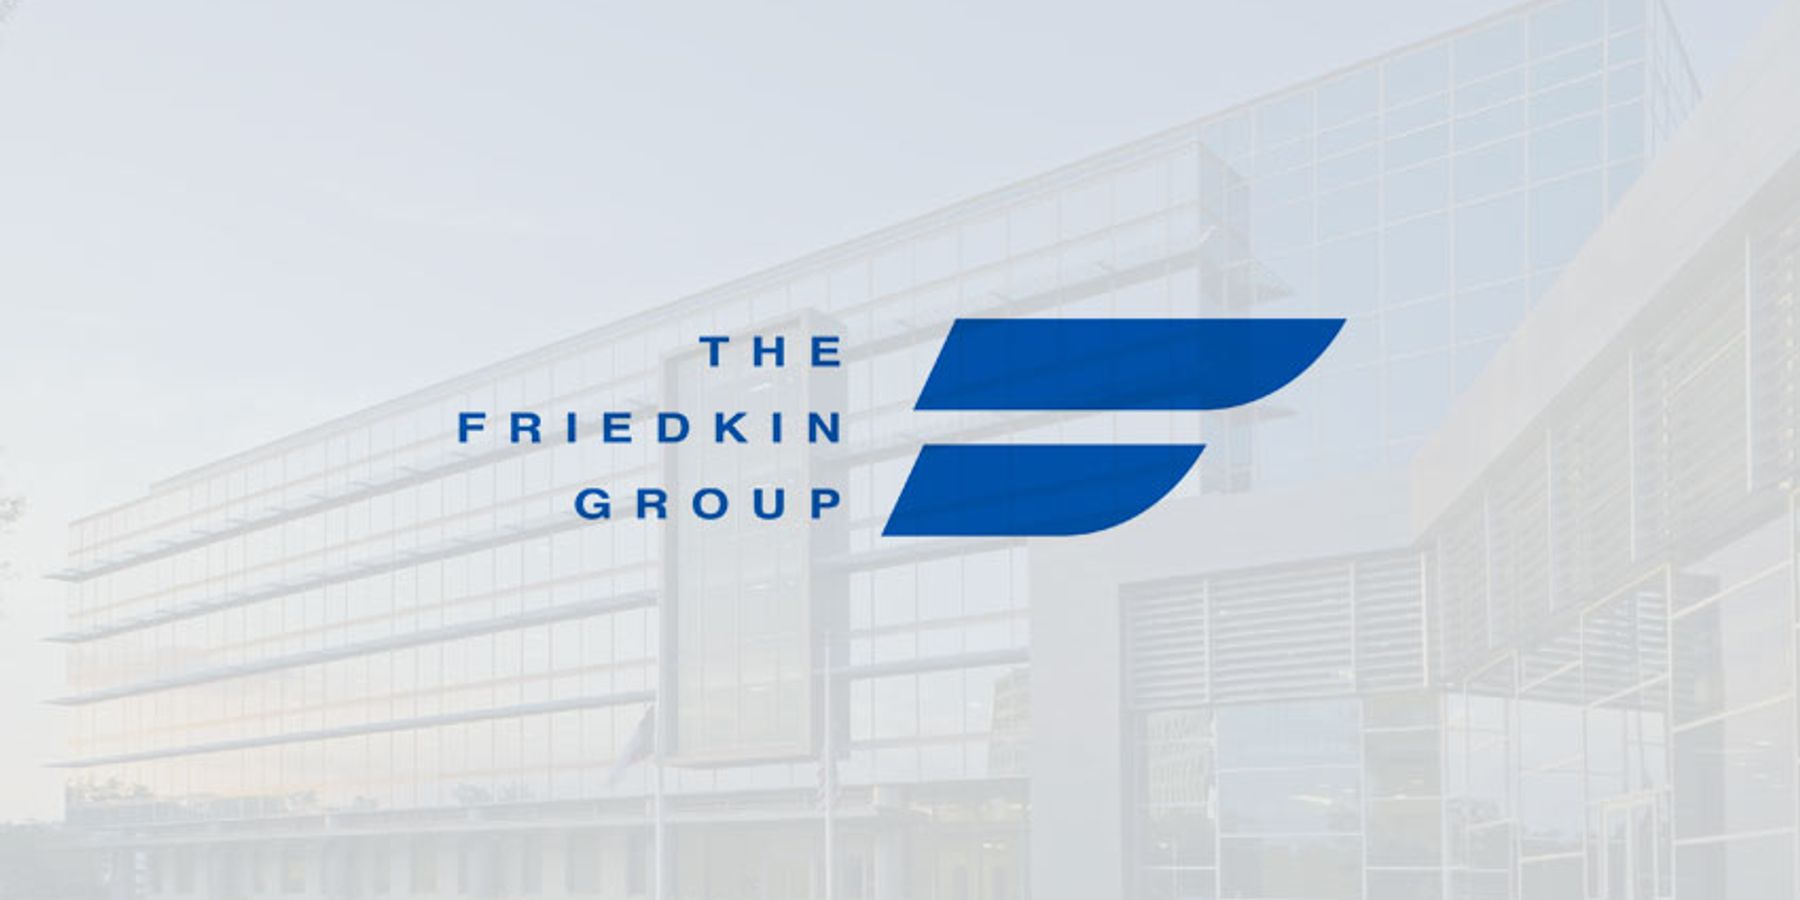 The Friedkin Group case study